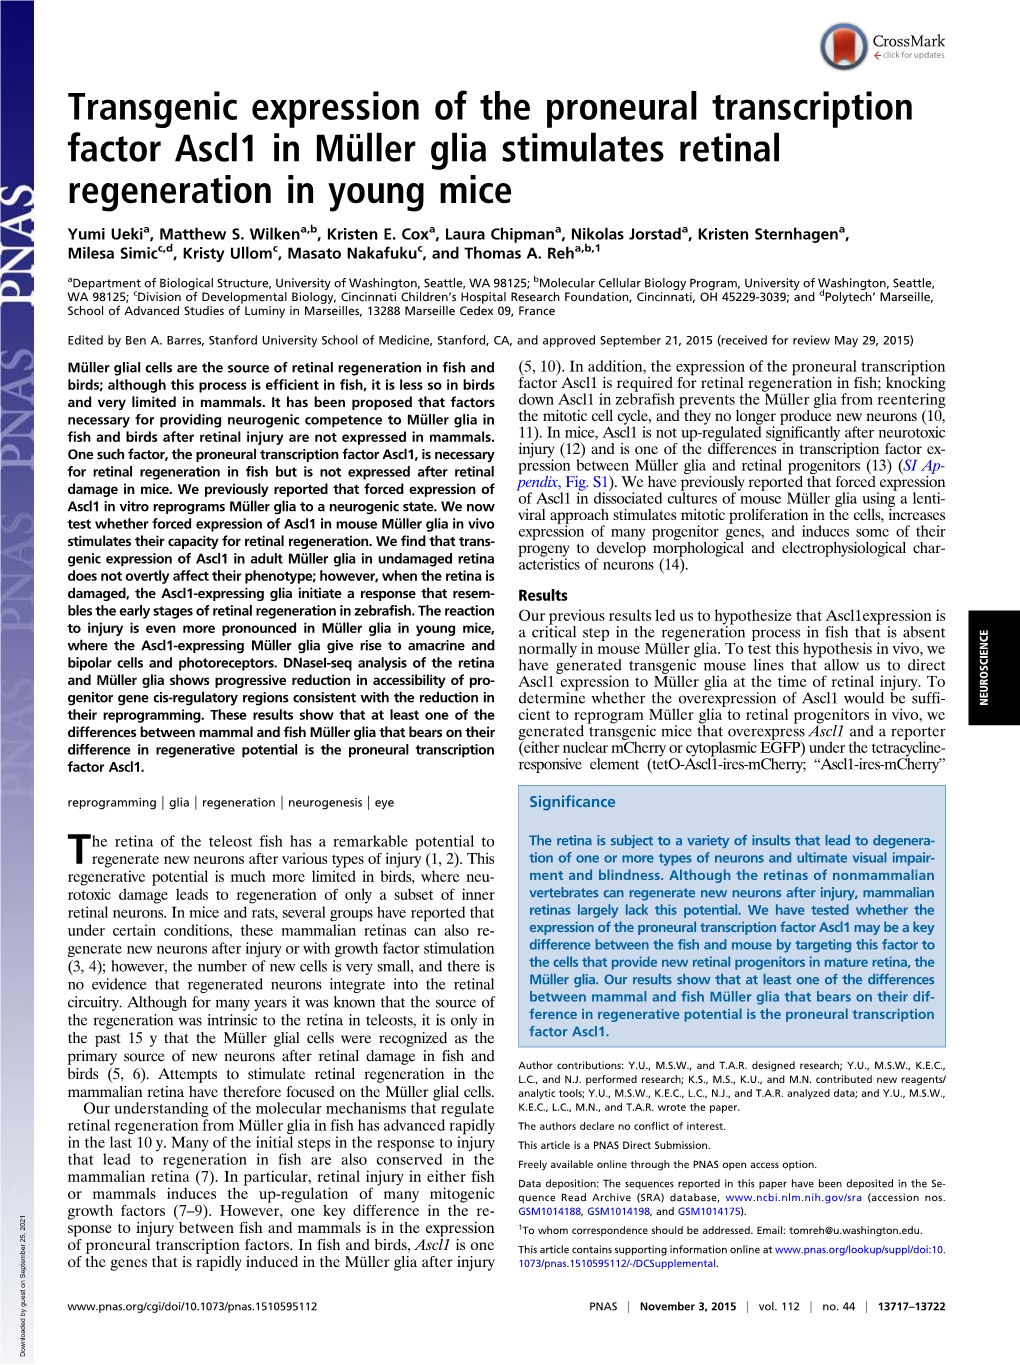 Transgenic Expression of the Proneural Transcription Factor Ascl1 in Müller Glia Stimulates Retinal Regeneration in Young Mice